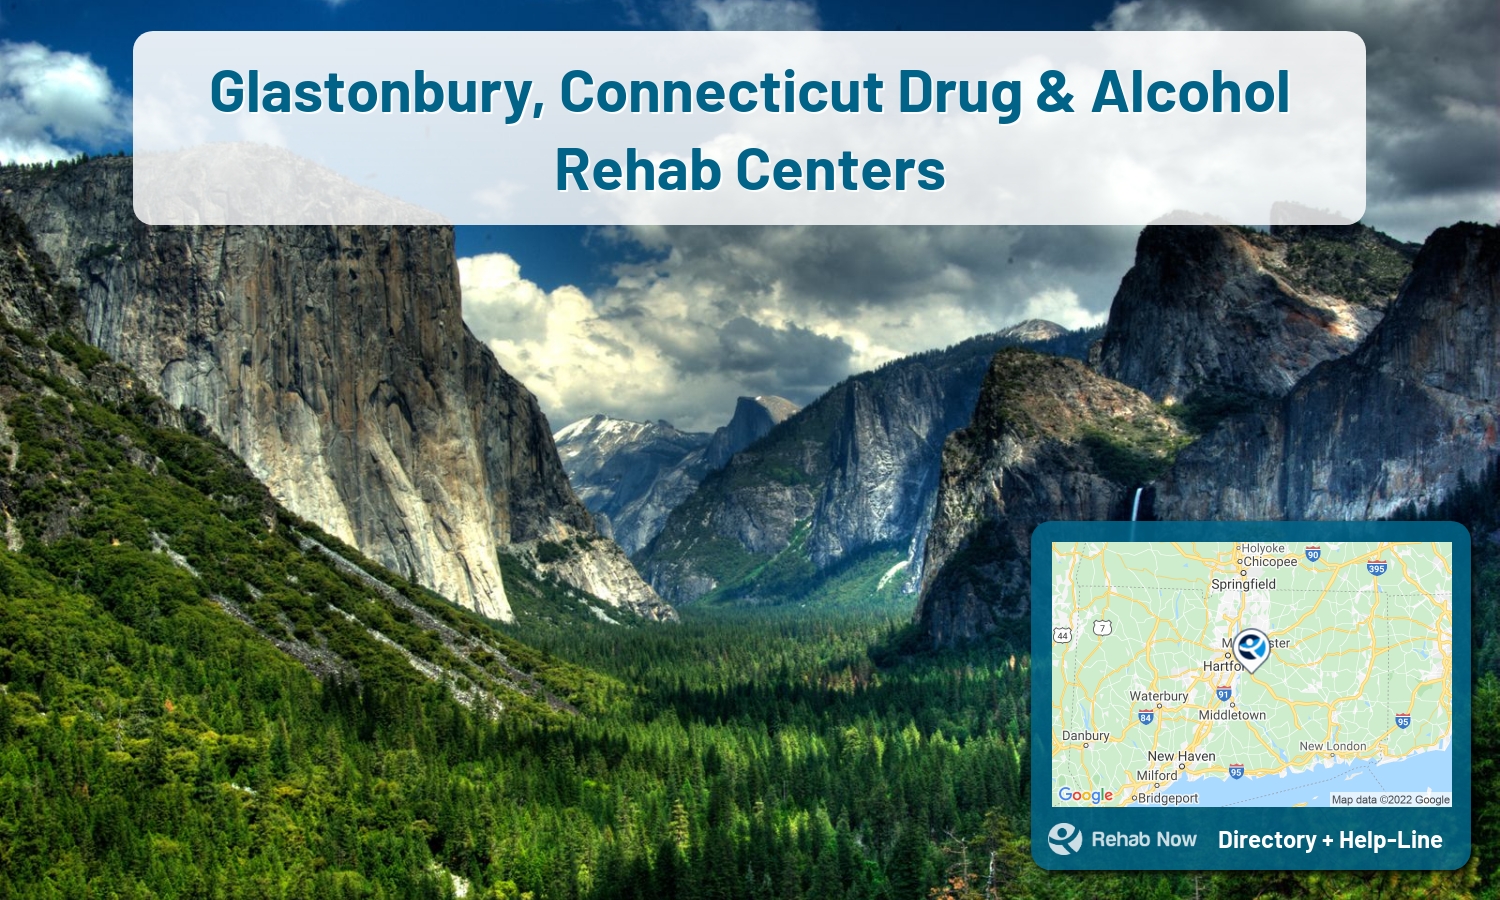 Our experts can help you find treatment now in Glastonbury, Connecticut. We list drug rehab and alcohol centers in Connecticut.